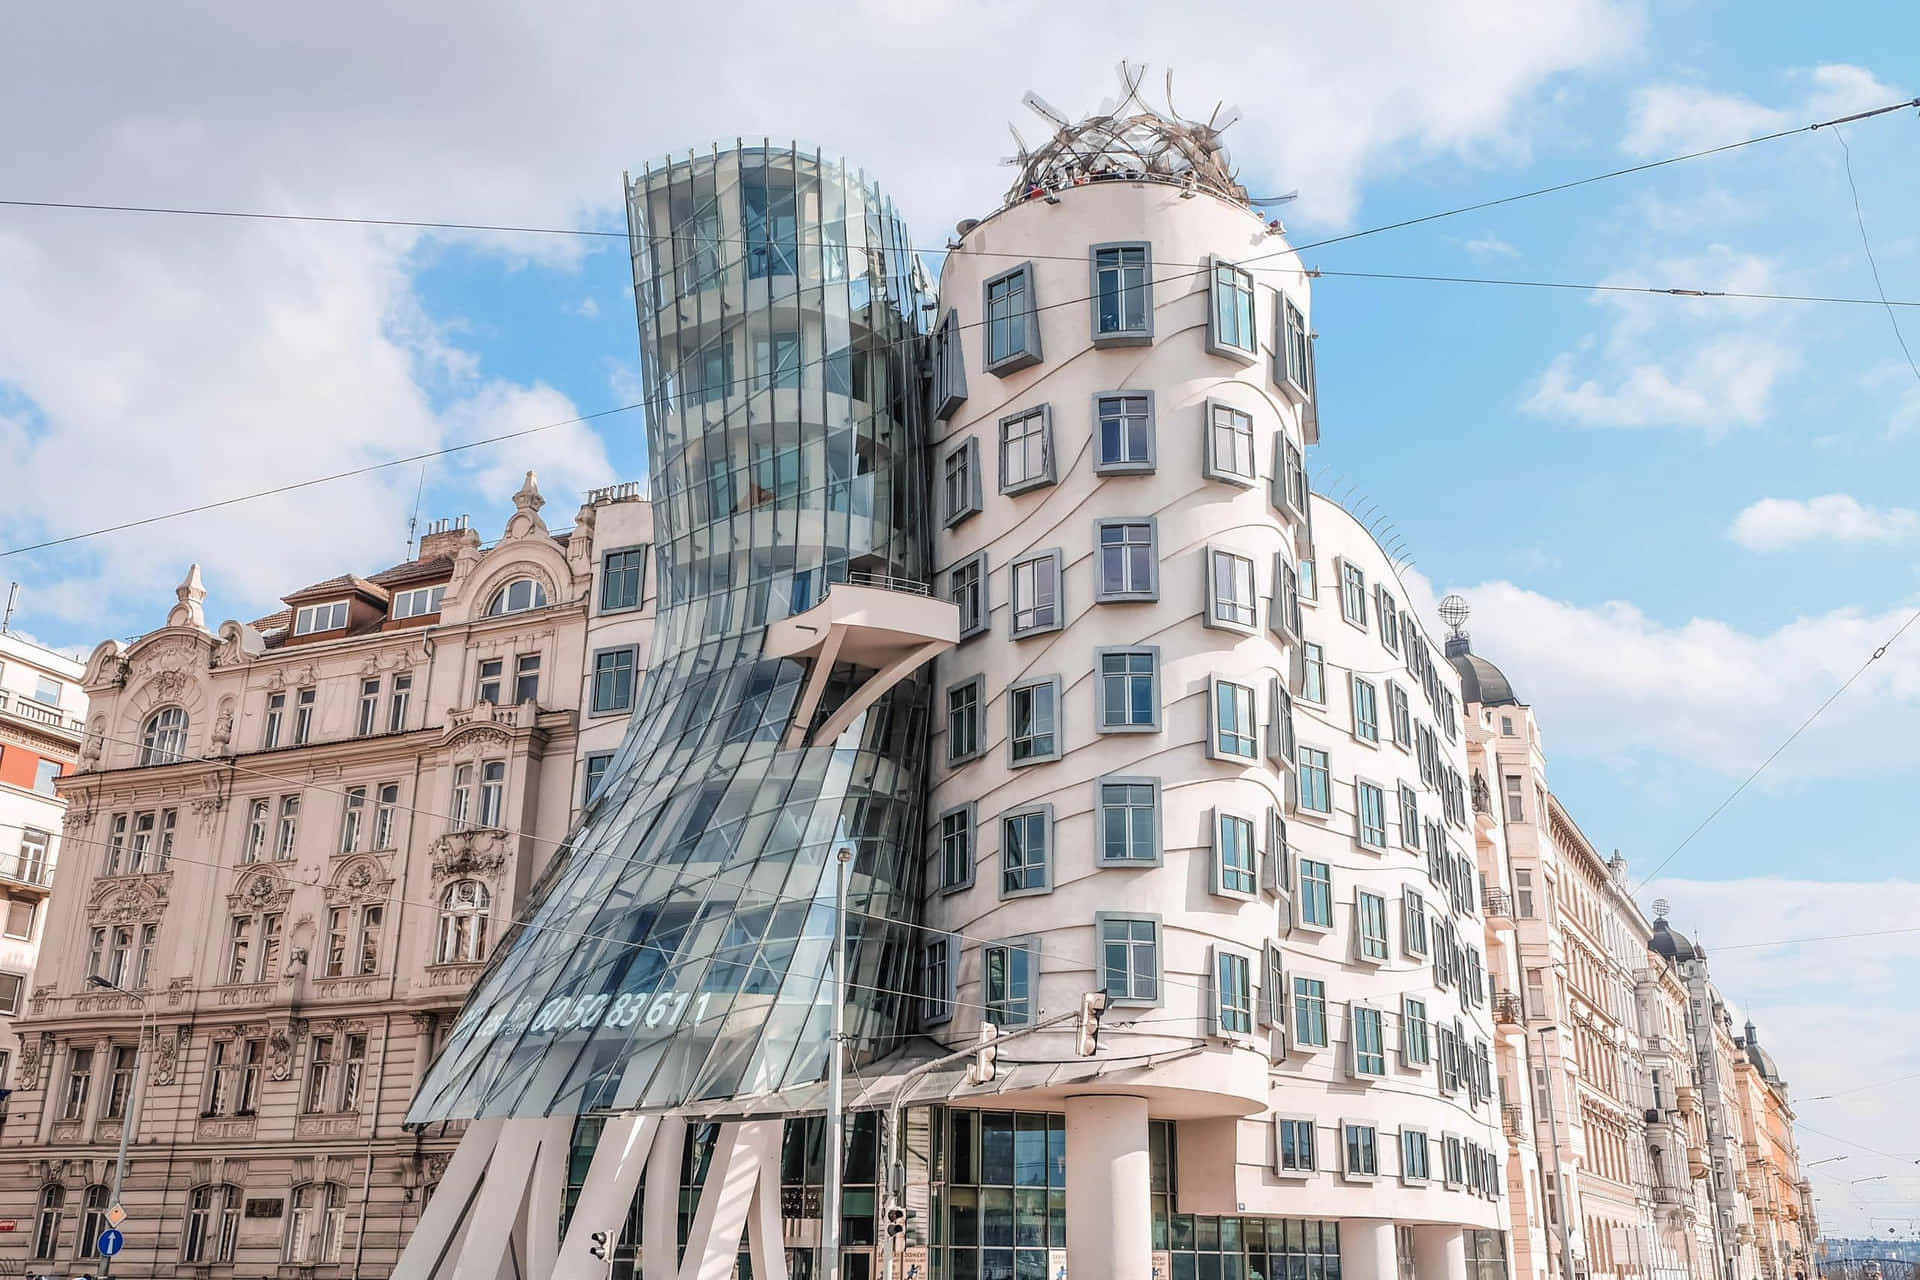 Enchanting View of the Dancing House in Prague under the Cloudy Blue Sky Wallpaper